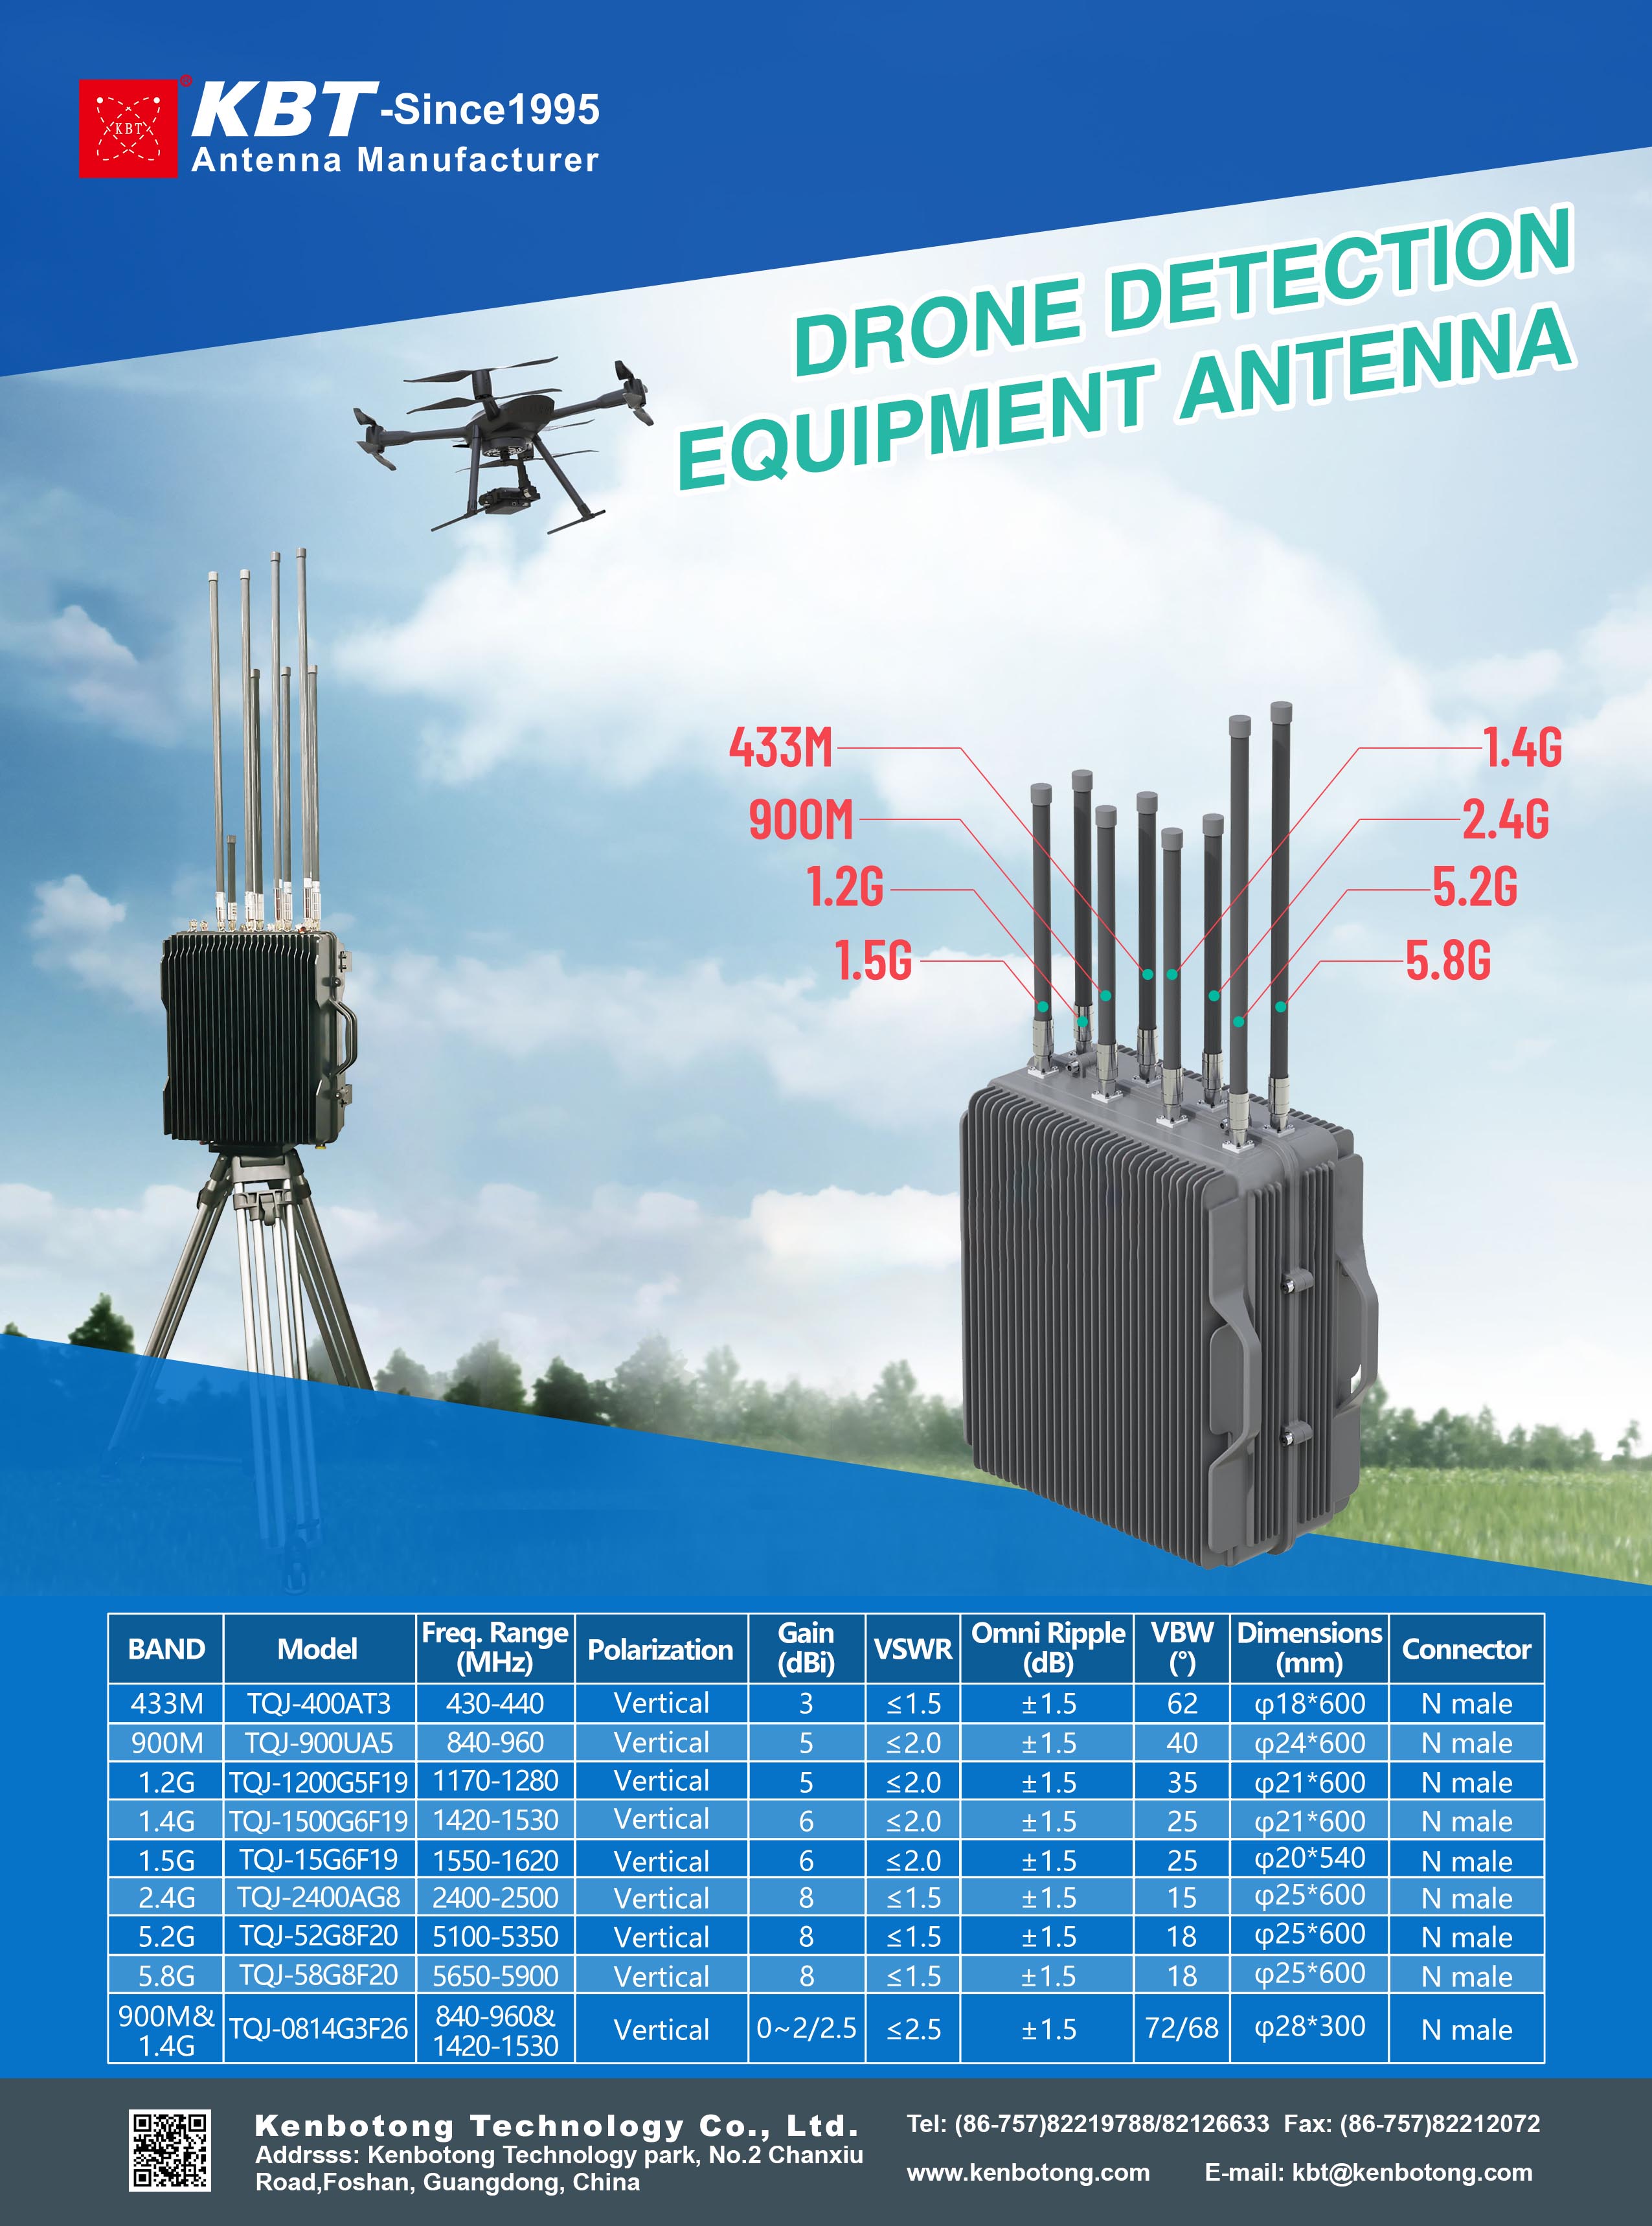 Drone Detection Antenna